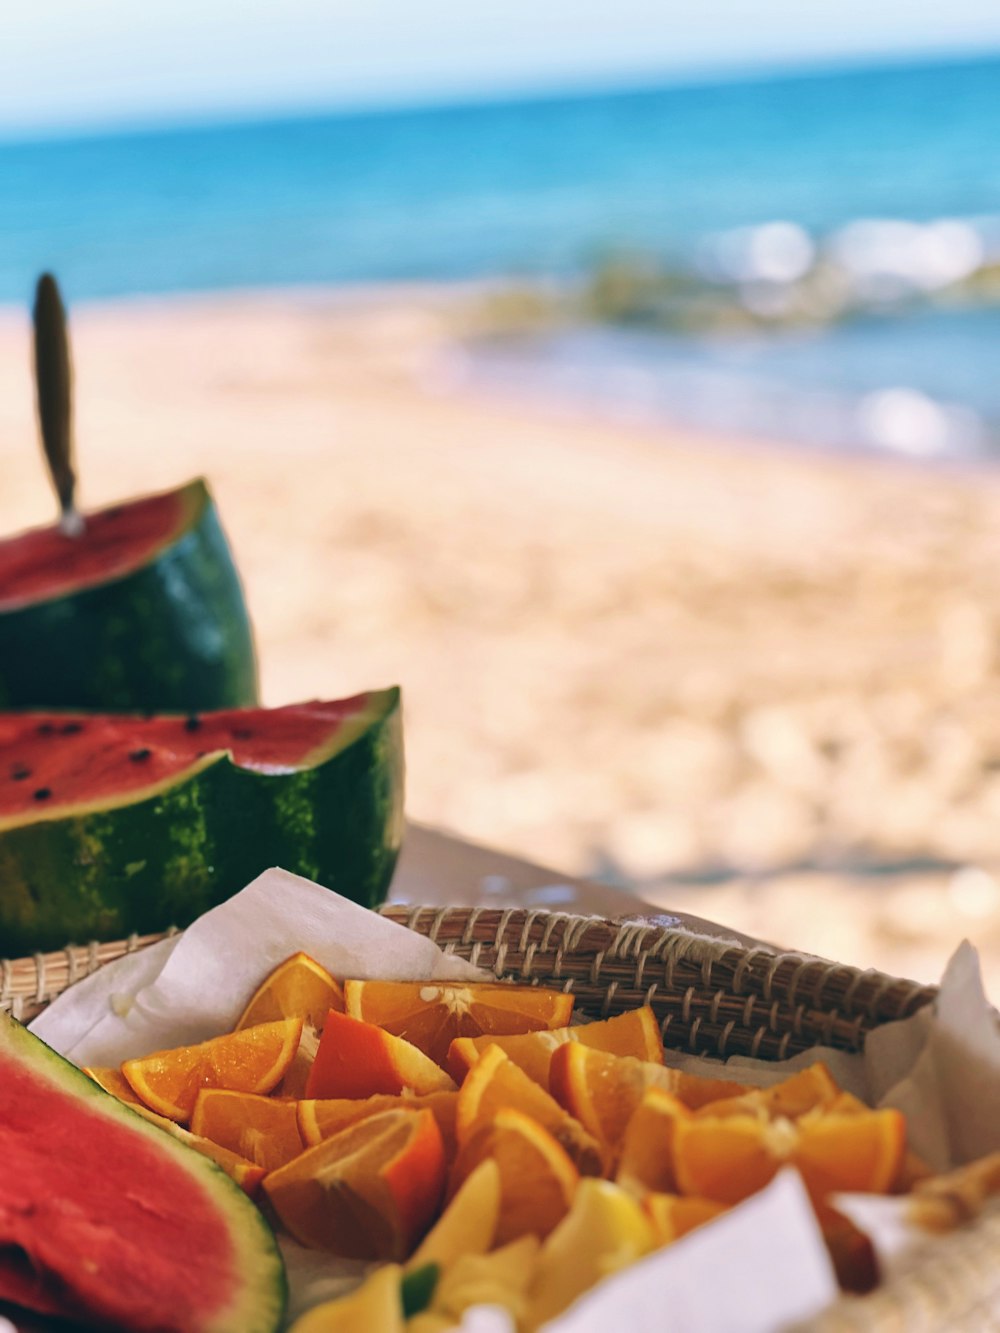 a plate of watermelon and melon slices on a beach